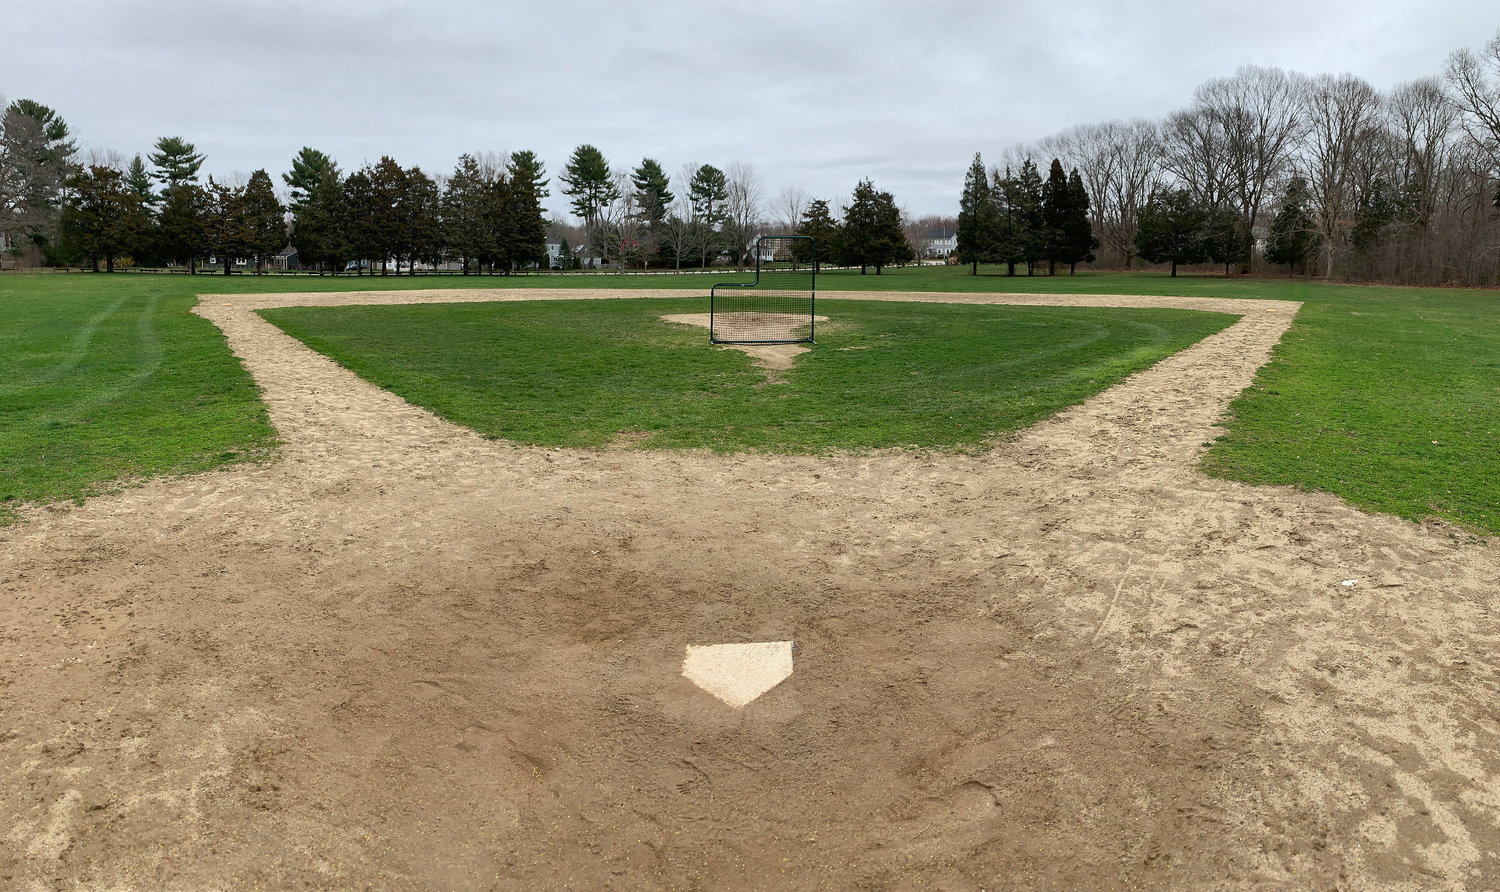 There is a plan to redevelop some of the athletic fields at Haines Park. The town has also submitted an application for a $400,000 grant from the Rhode Island Department of Environmental Management.